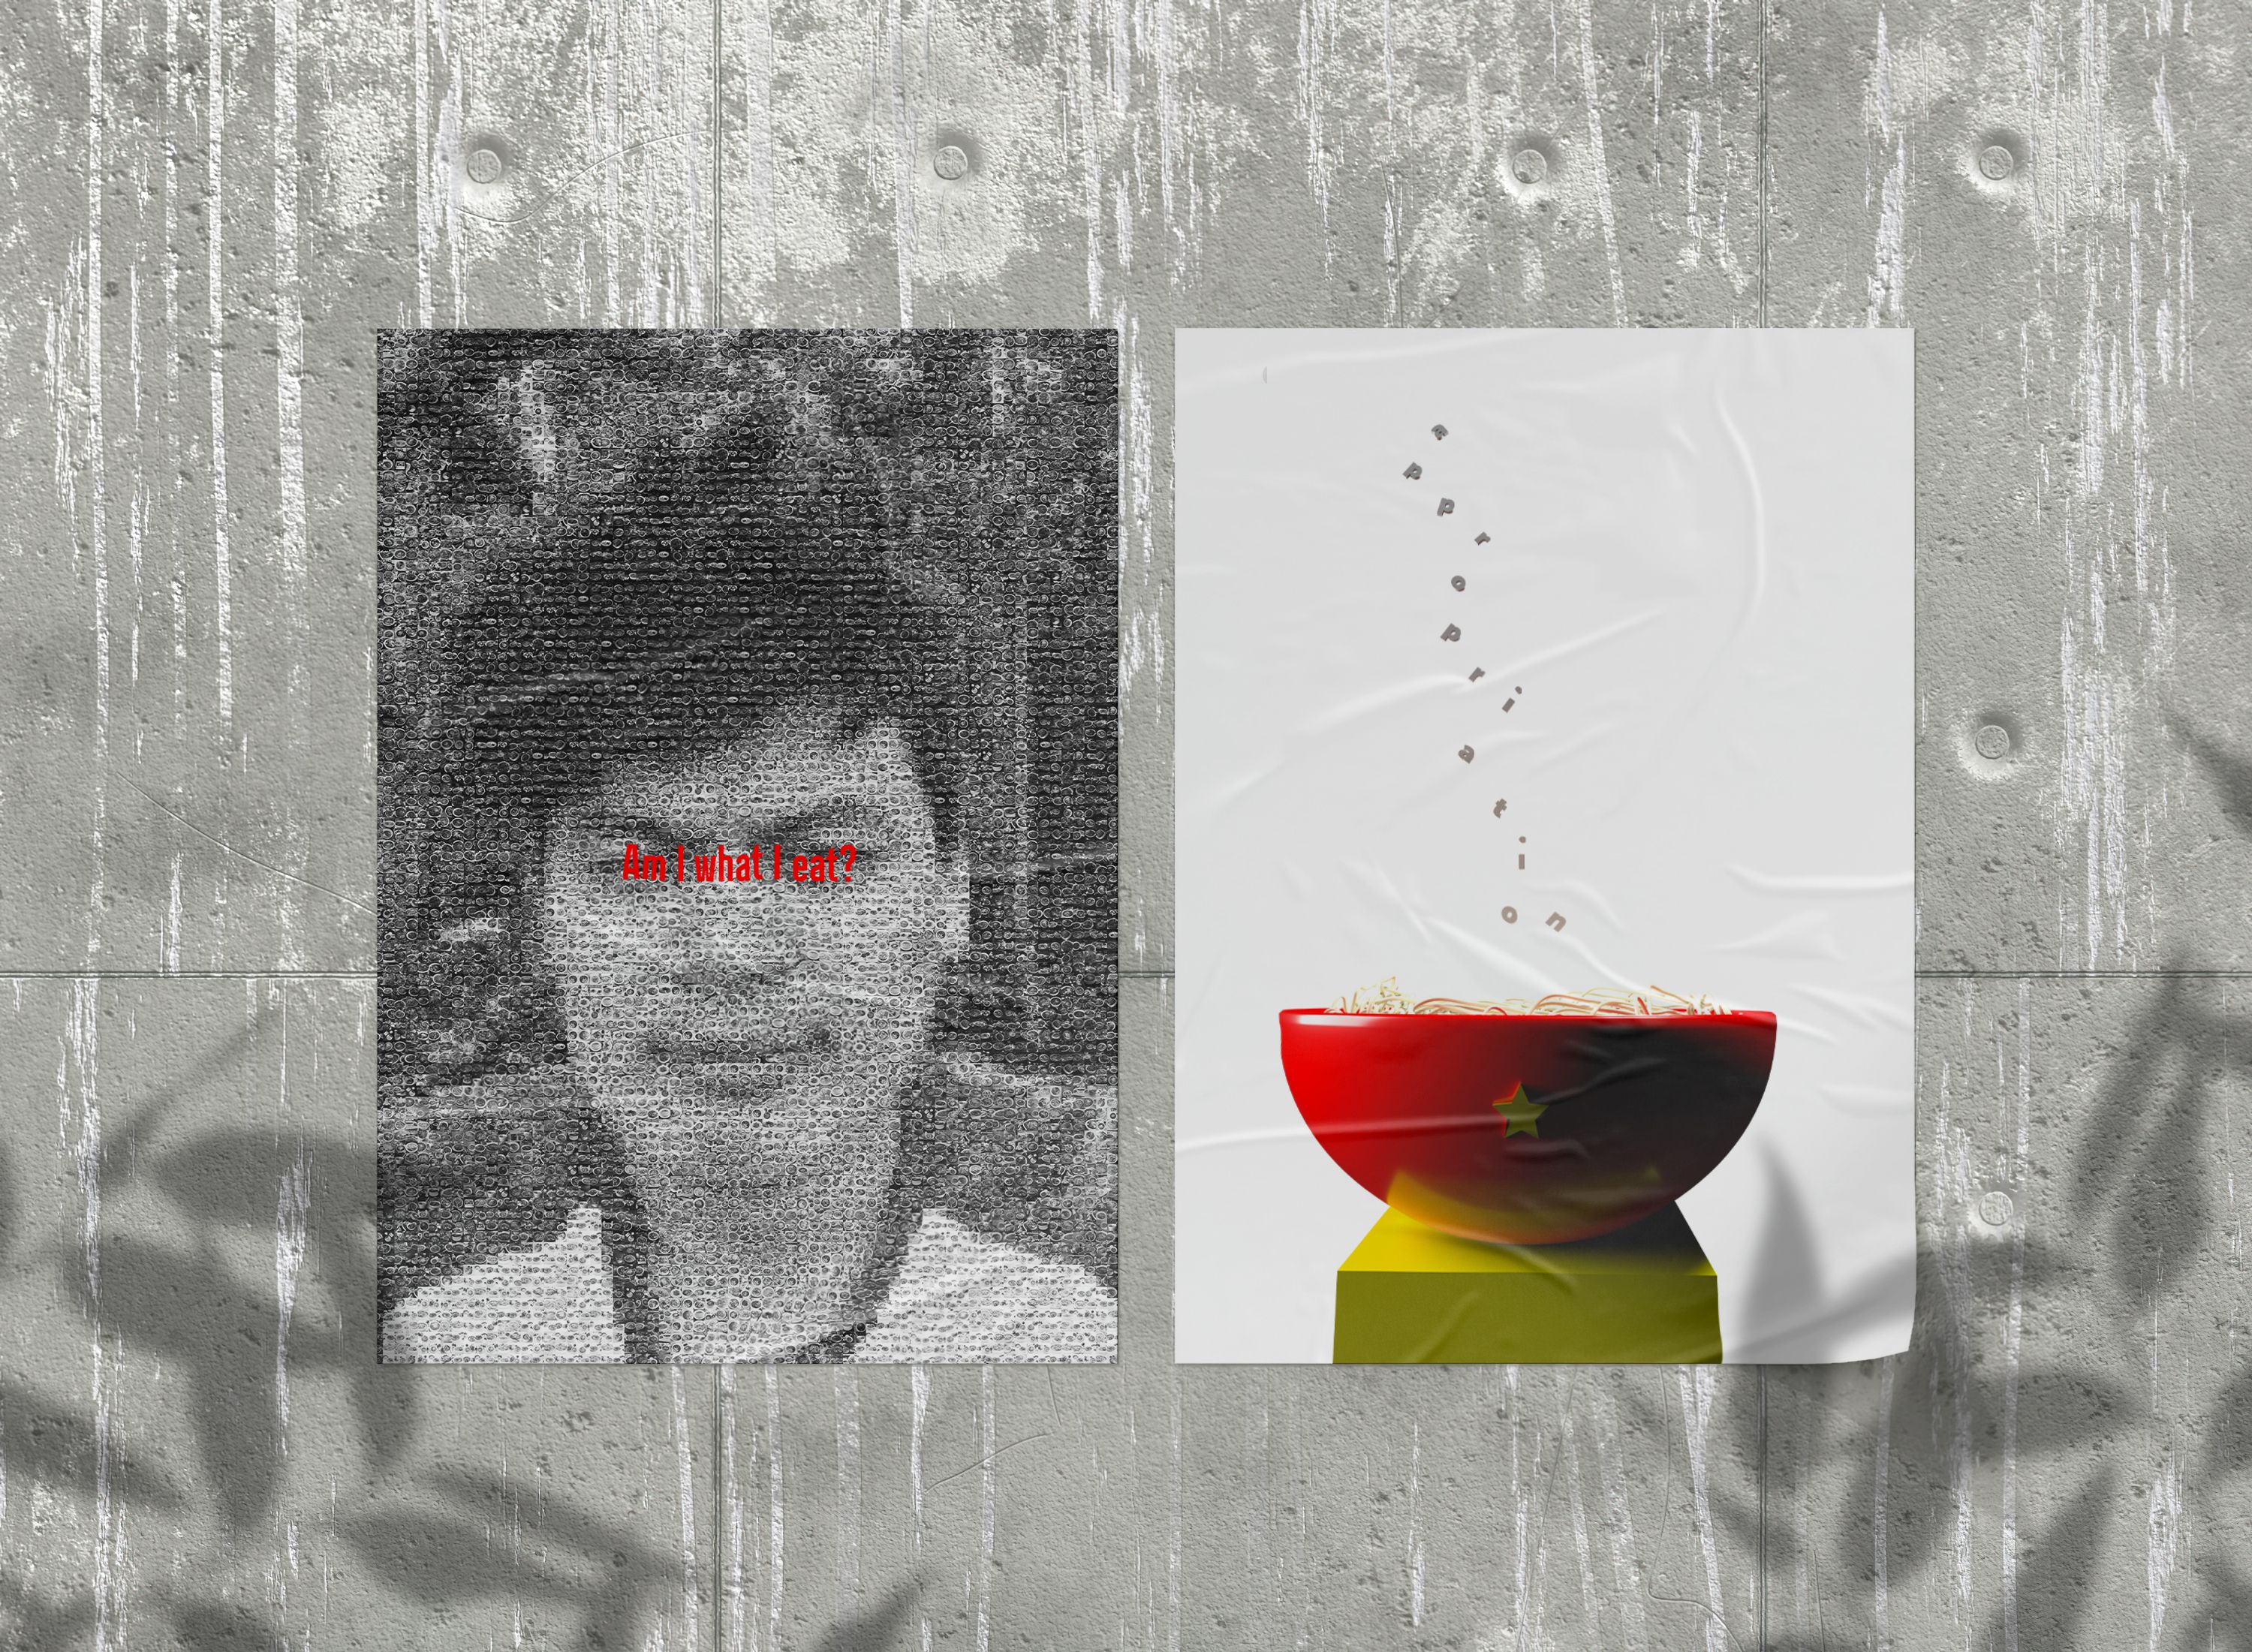 Digital mockup of two posters. The left is a portrait made from bowls of pho with red words reading "Am I what I eat?", the right is a red bowl of pho on a green pedestal with the word, "appropriation"